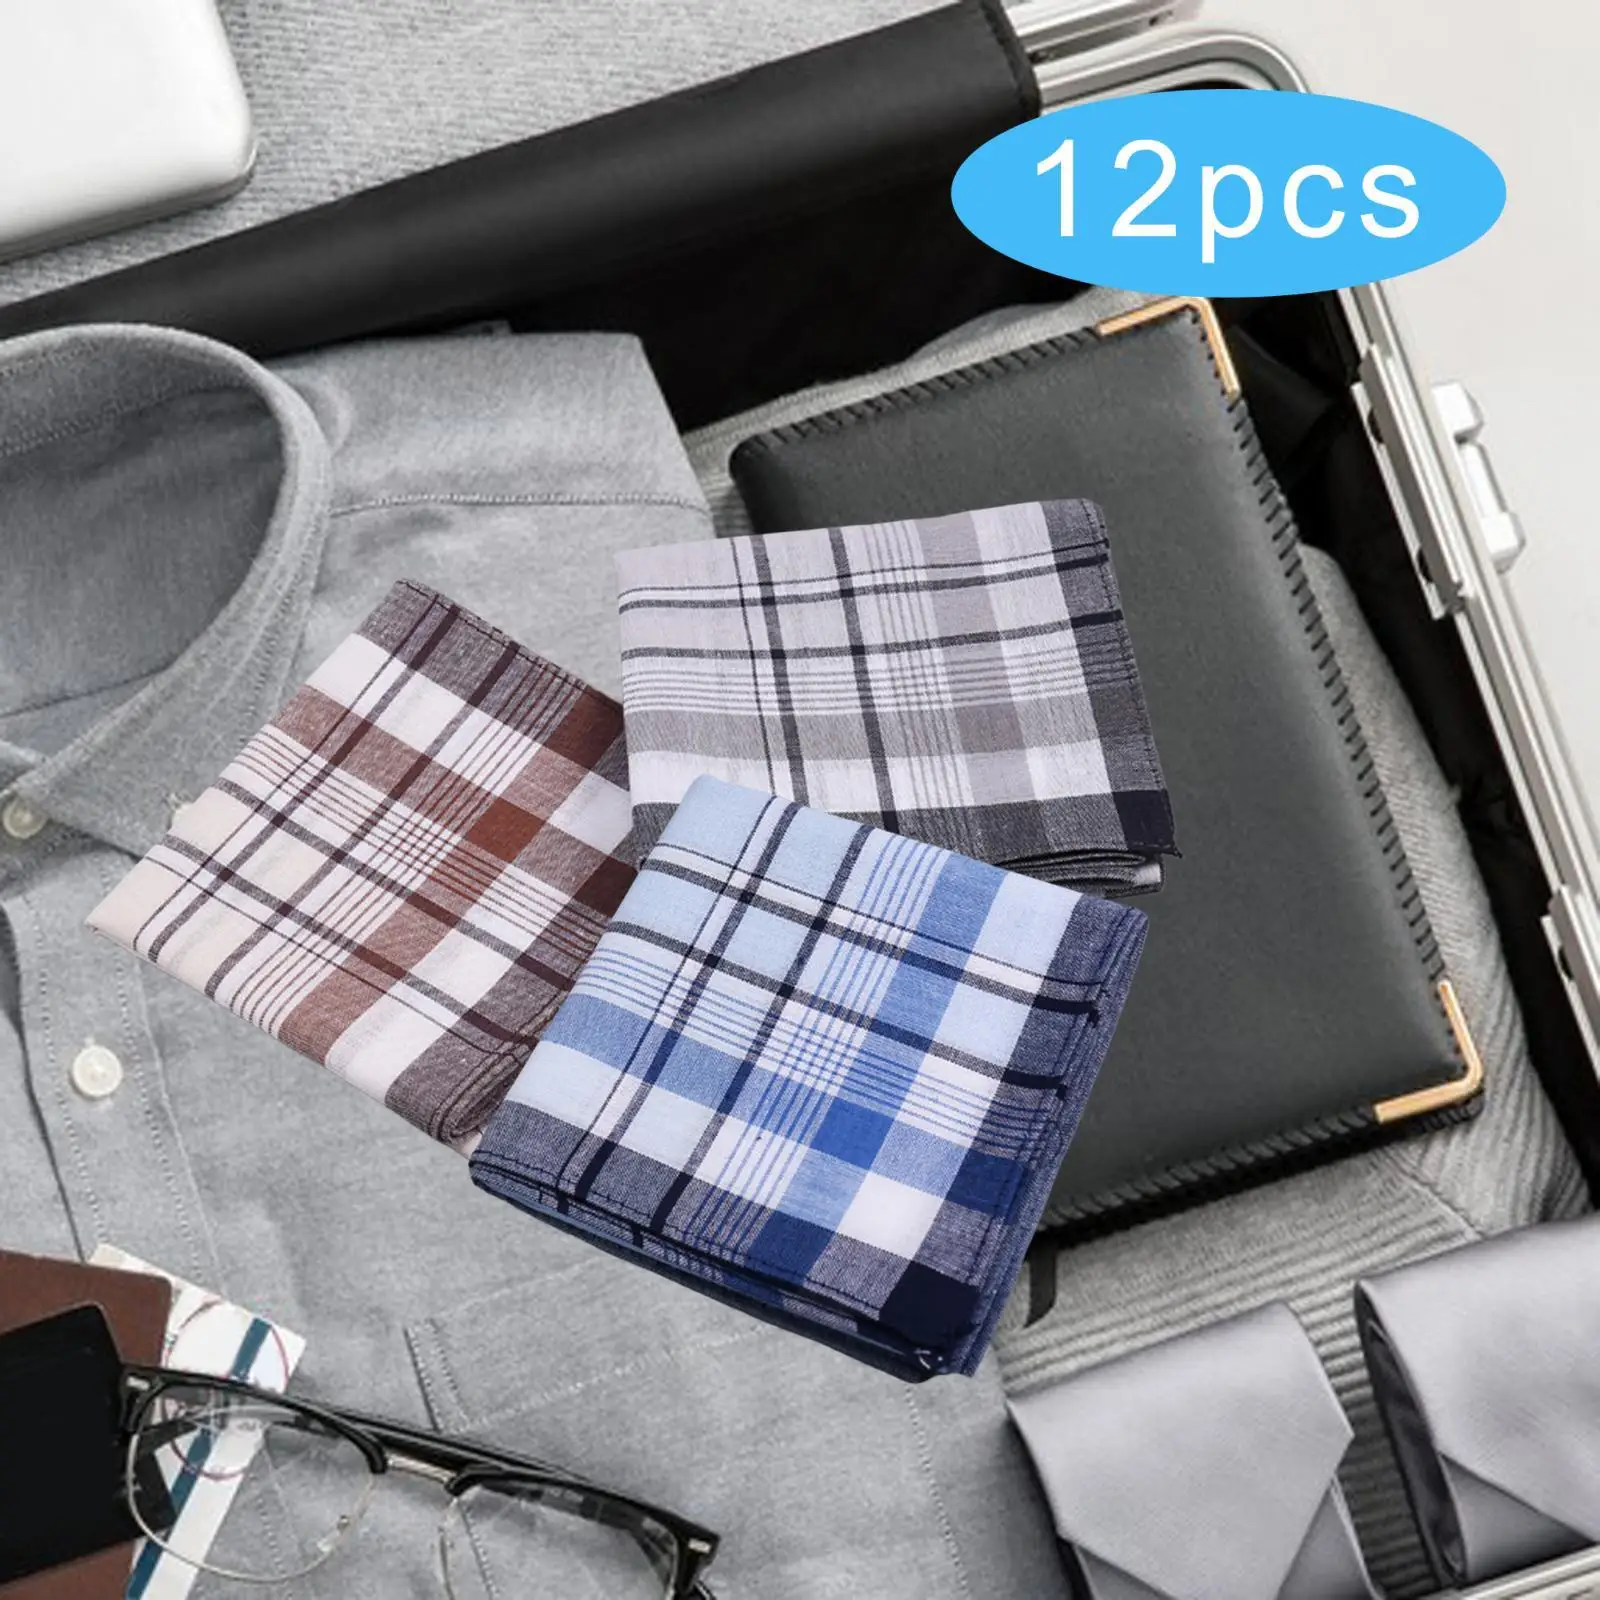 12x Cotton Men`s Handkerchiefs Assorted Gifts 40cm Hanky Pocket Square Hankies for Prom Celebration Grandfathers Casual Formal